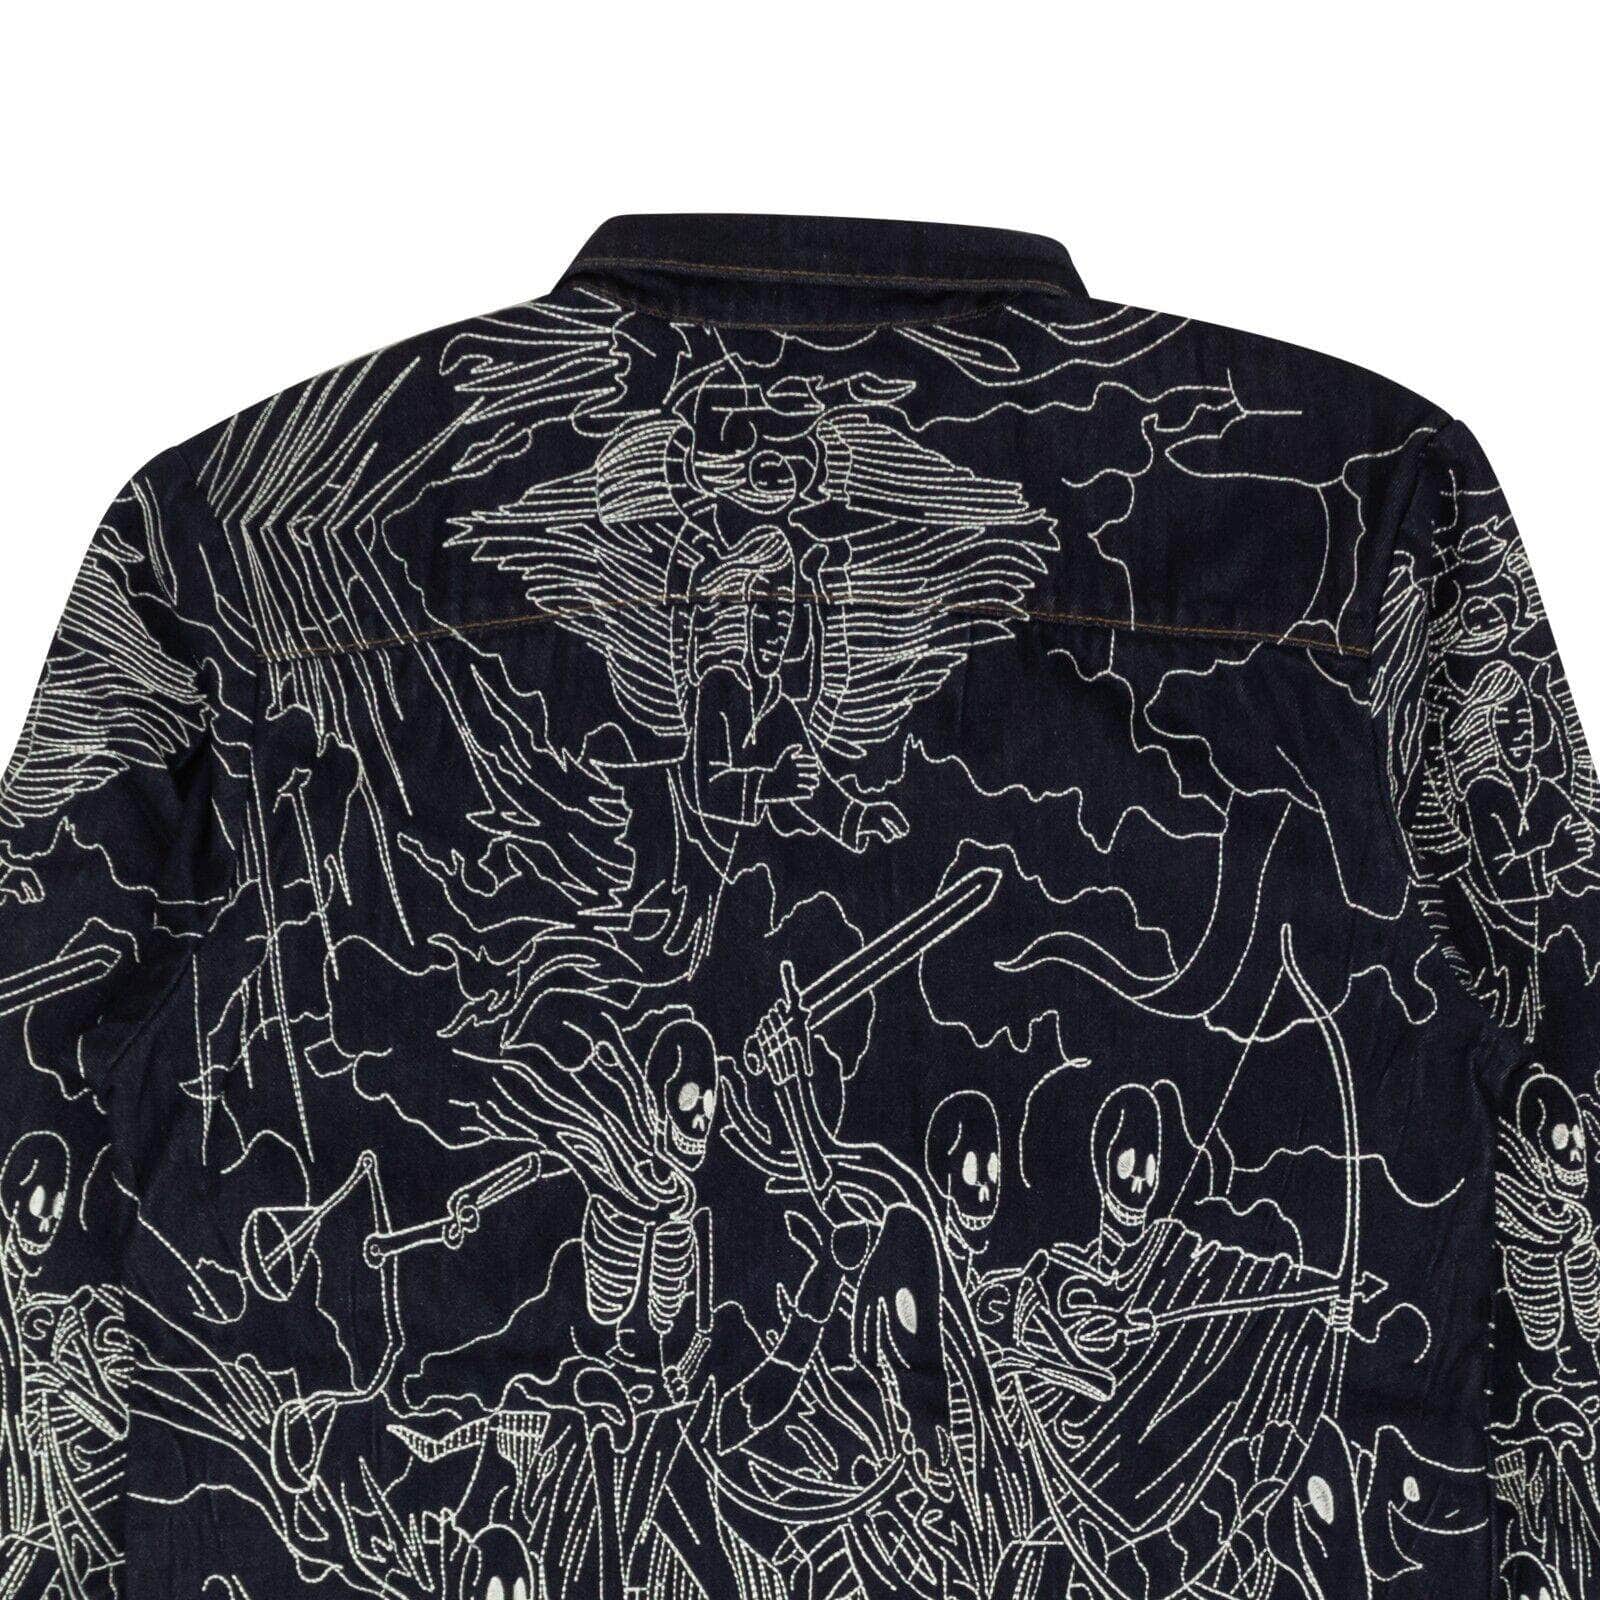 Who Decides War 500-750, channelenable-all, chicmi, couponcollection, gender-mens, main-clothing, mens-shoes, size-l, size-xl, size-xxxl, who-decides-war Denim Embroidered Four Horseman Workshirt